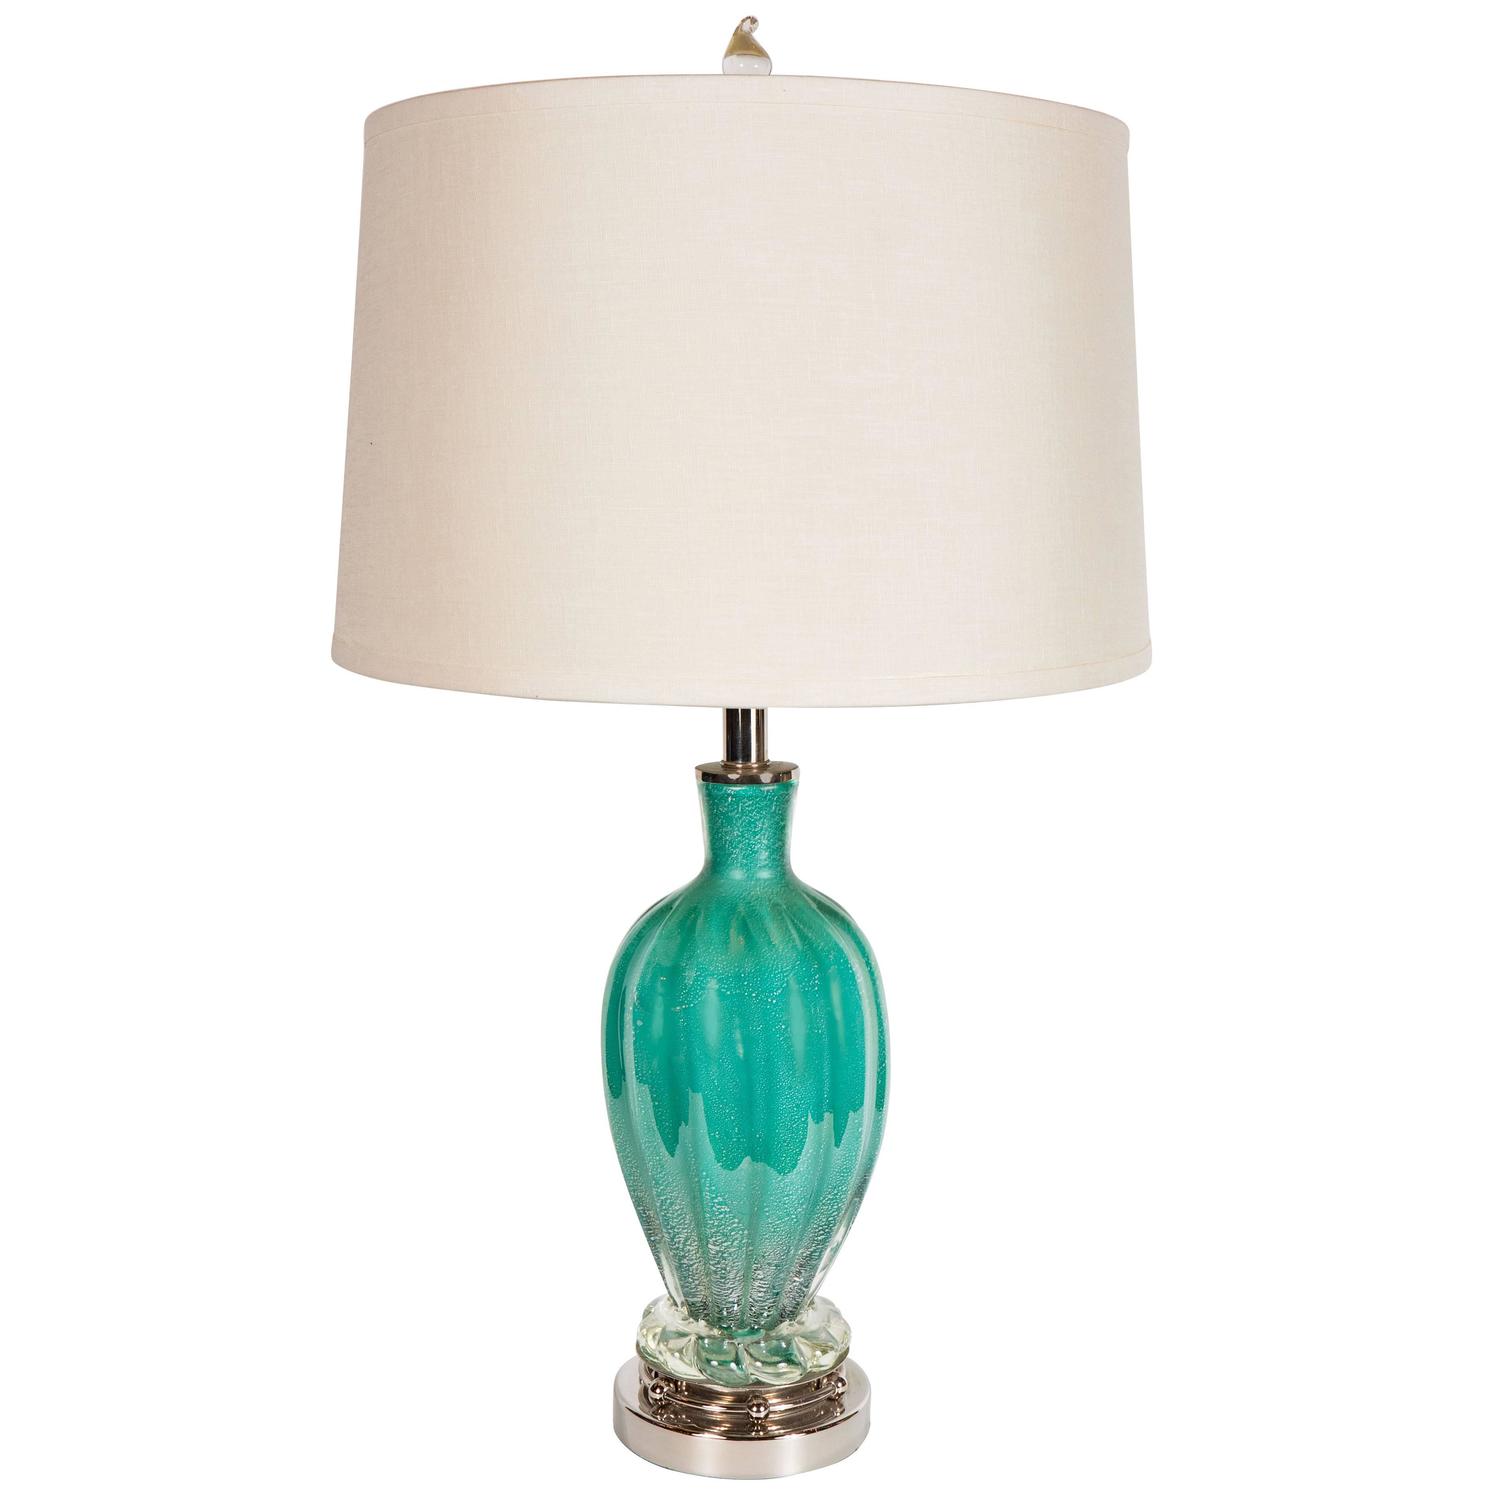 Mid Century Modernist Turquoise Murano Glass Table Lamp With Nickel